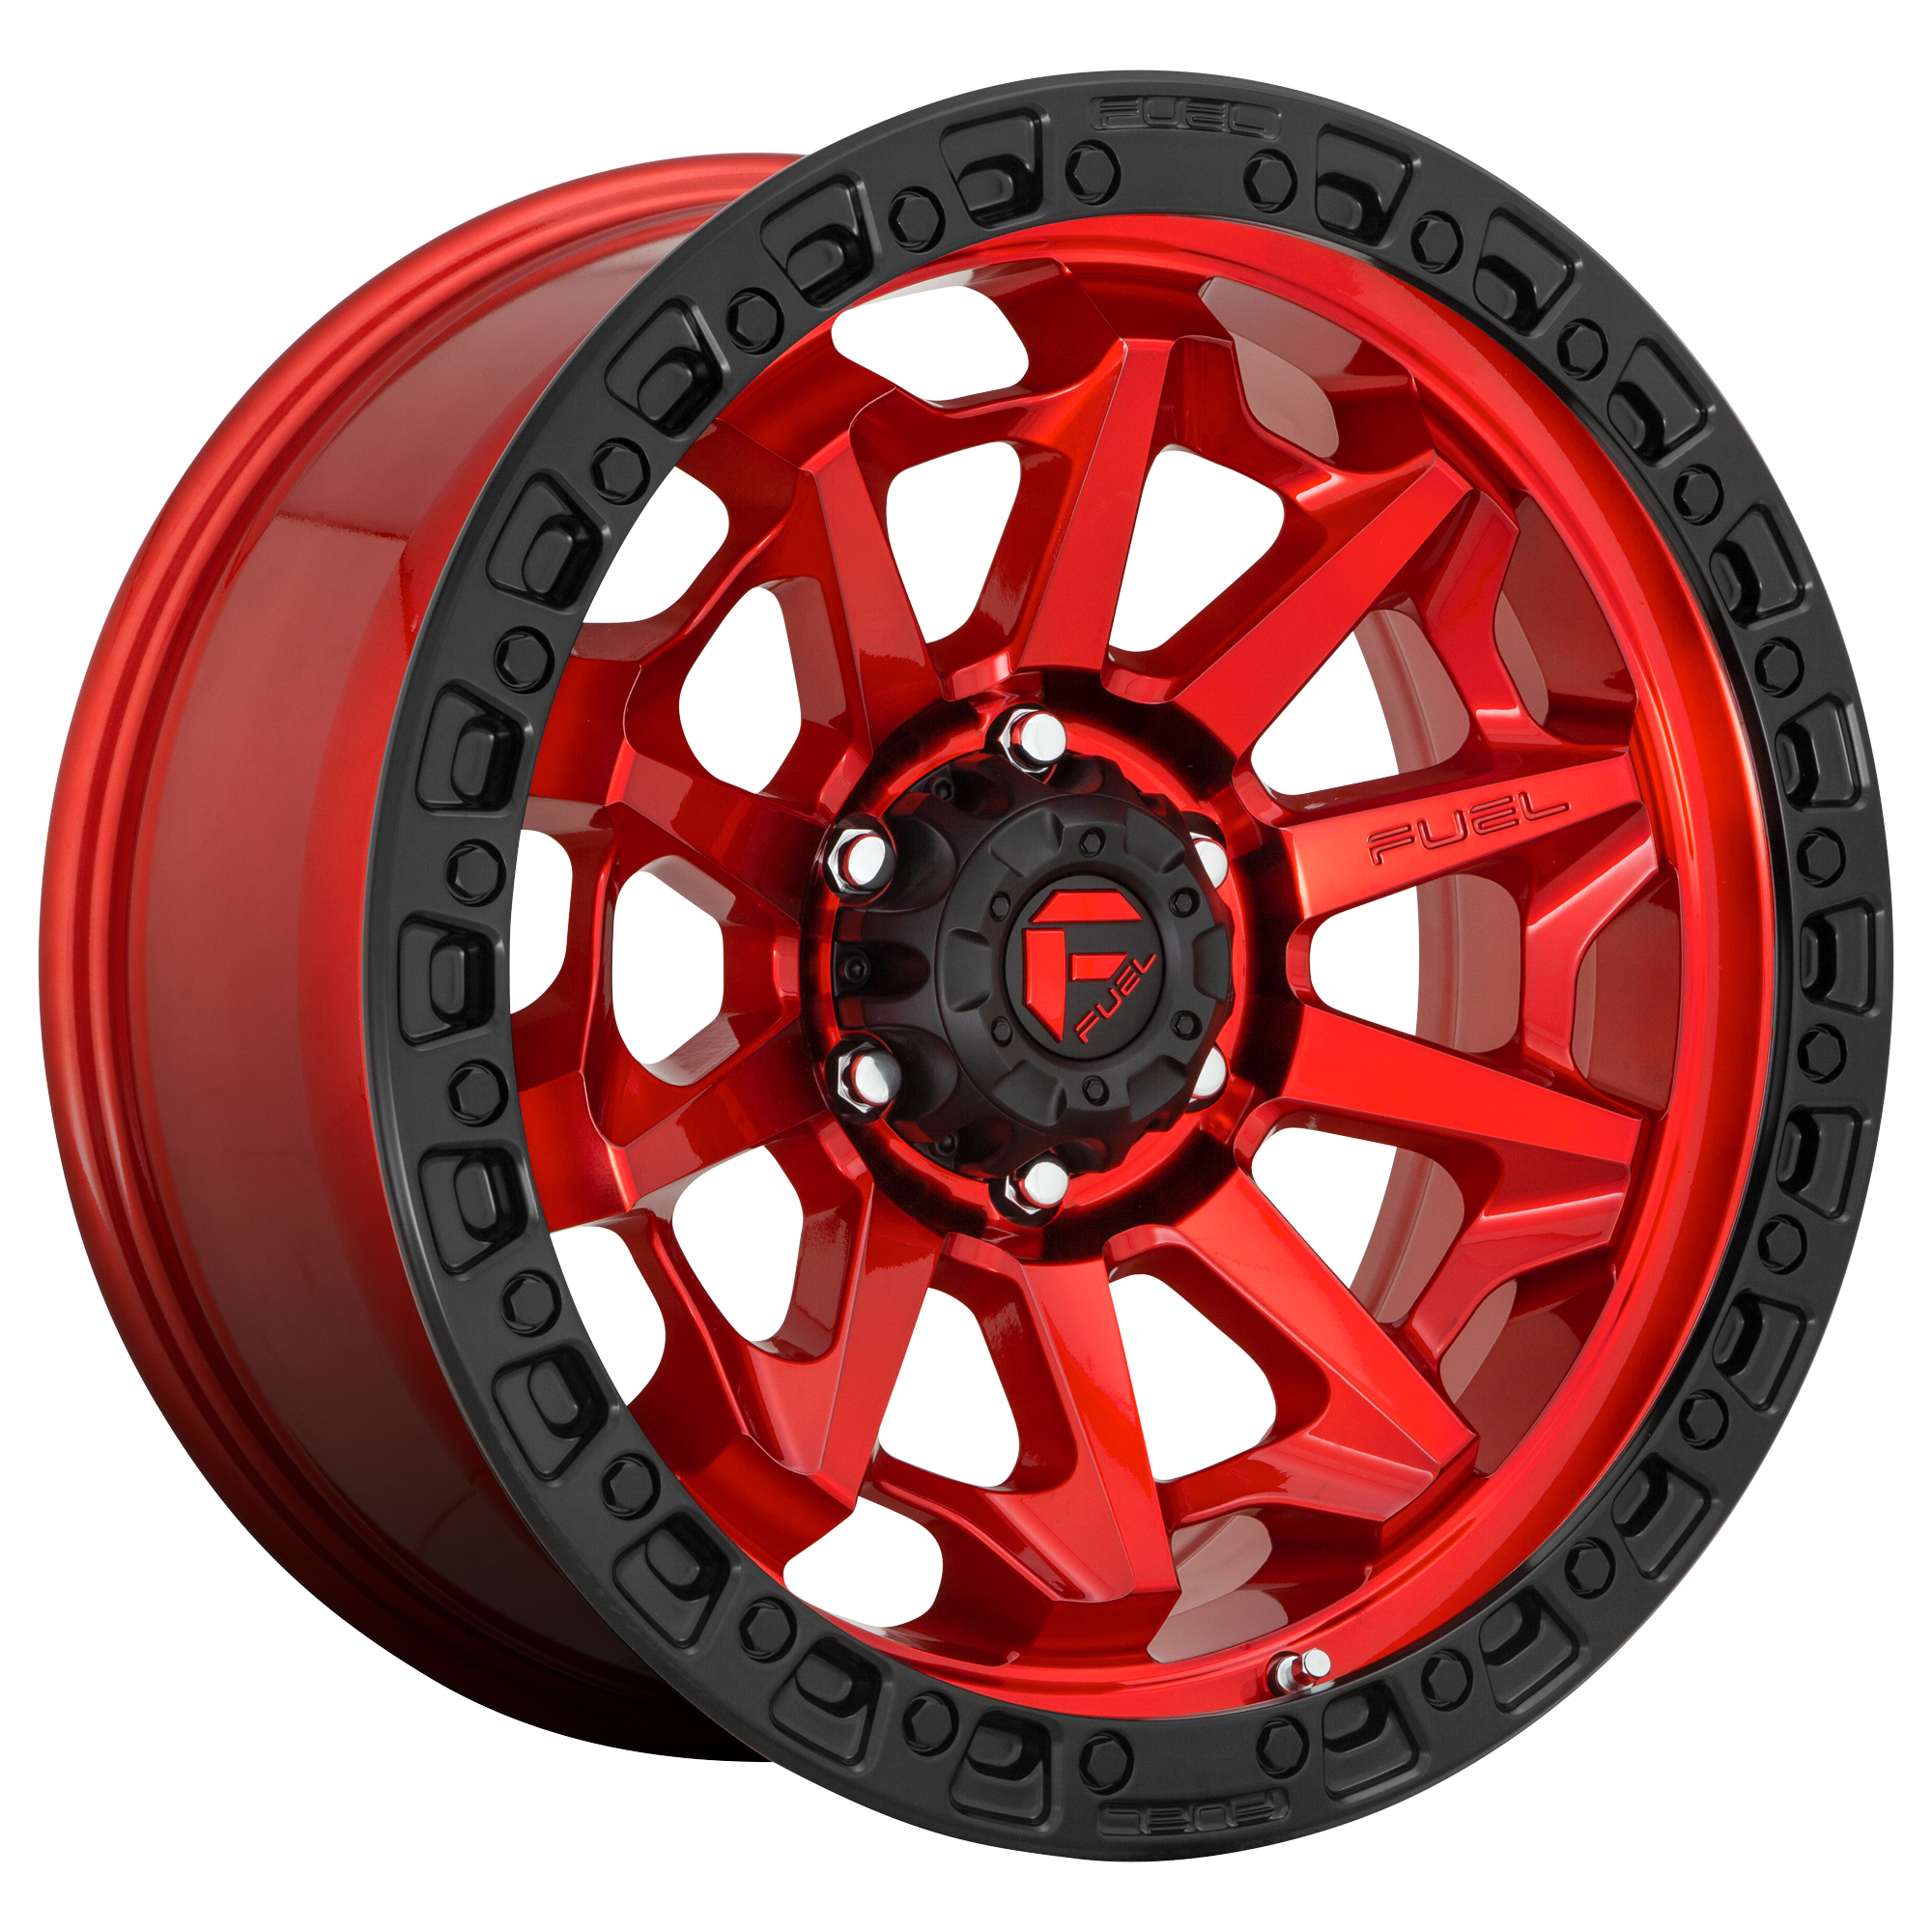 COVERT 17x9 6x139.70 CANDY RED BLACK BEAD RING (-12 mm) - Tires and Engine Performance